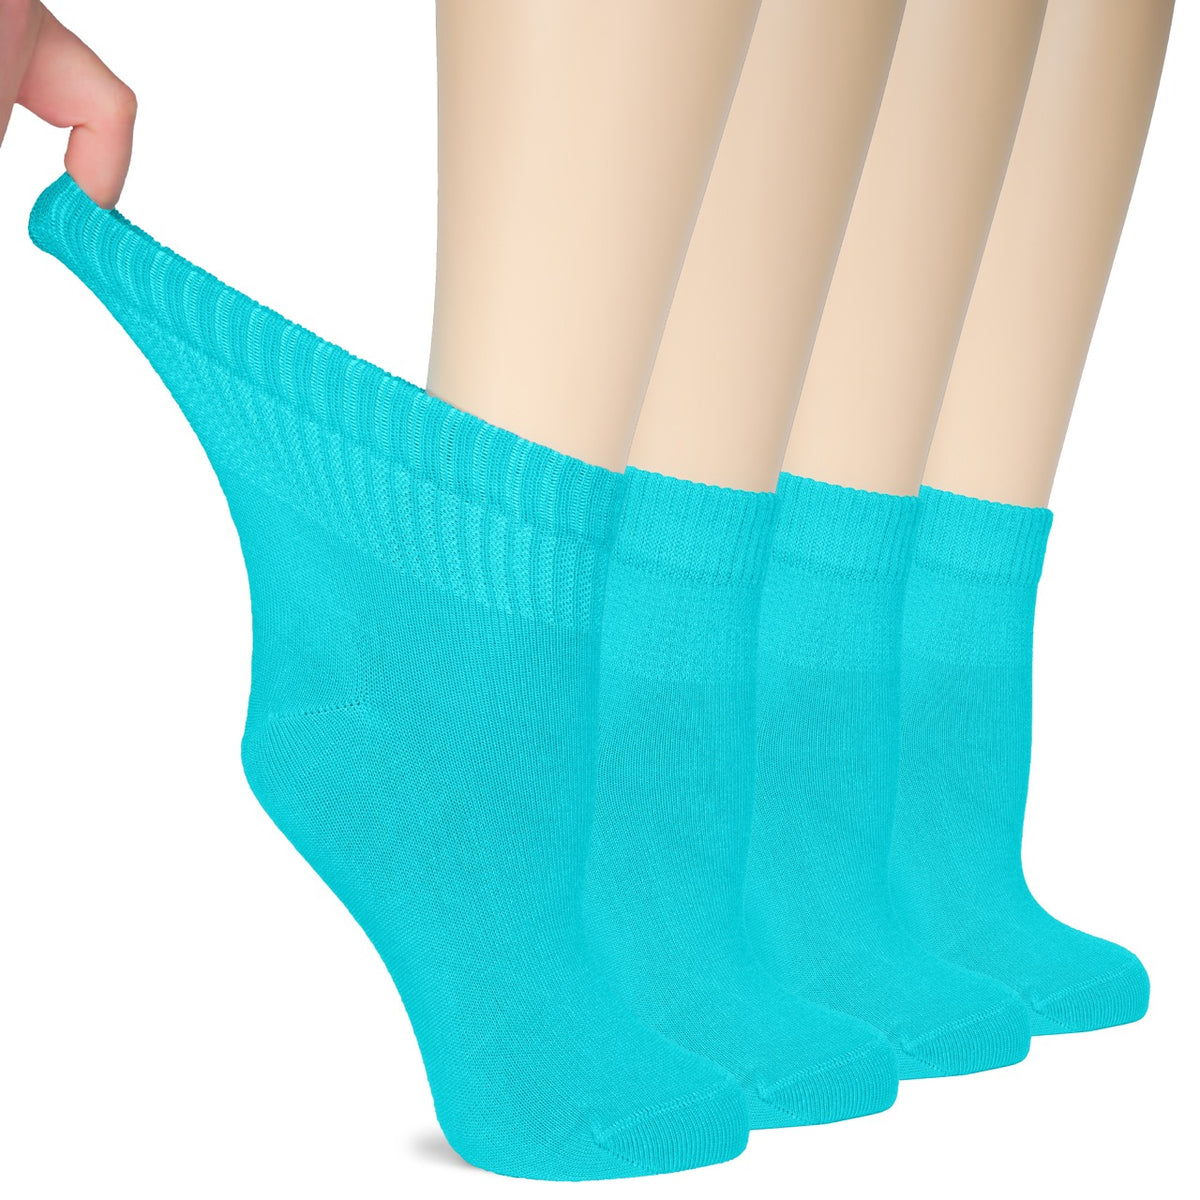 A pair of Blue Curacao socks held up by a woman's feet. These bamboo thin socks offer comfort, style, and good health. With a seamless toe and non-binding top, they provide a perfect fit and improved circulation. Get four pairs for worry-free laundry days!